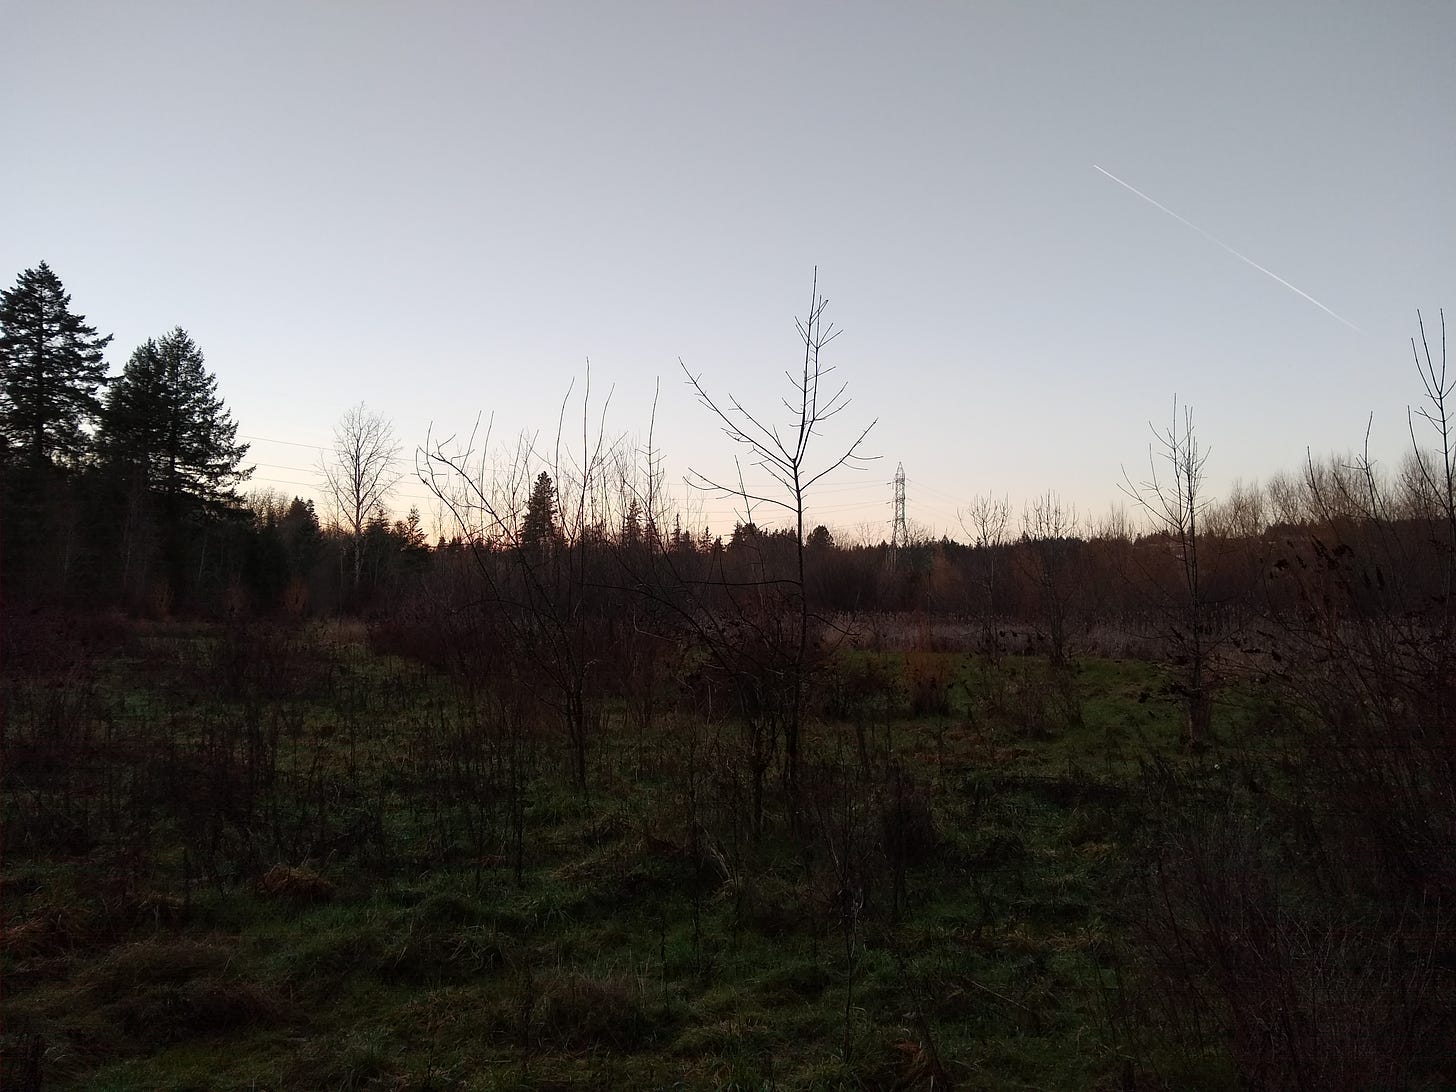 A field, trees, and the sunset